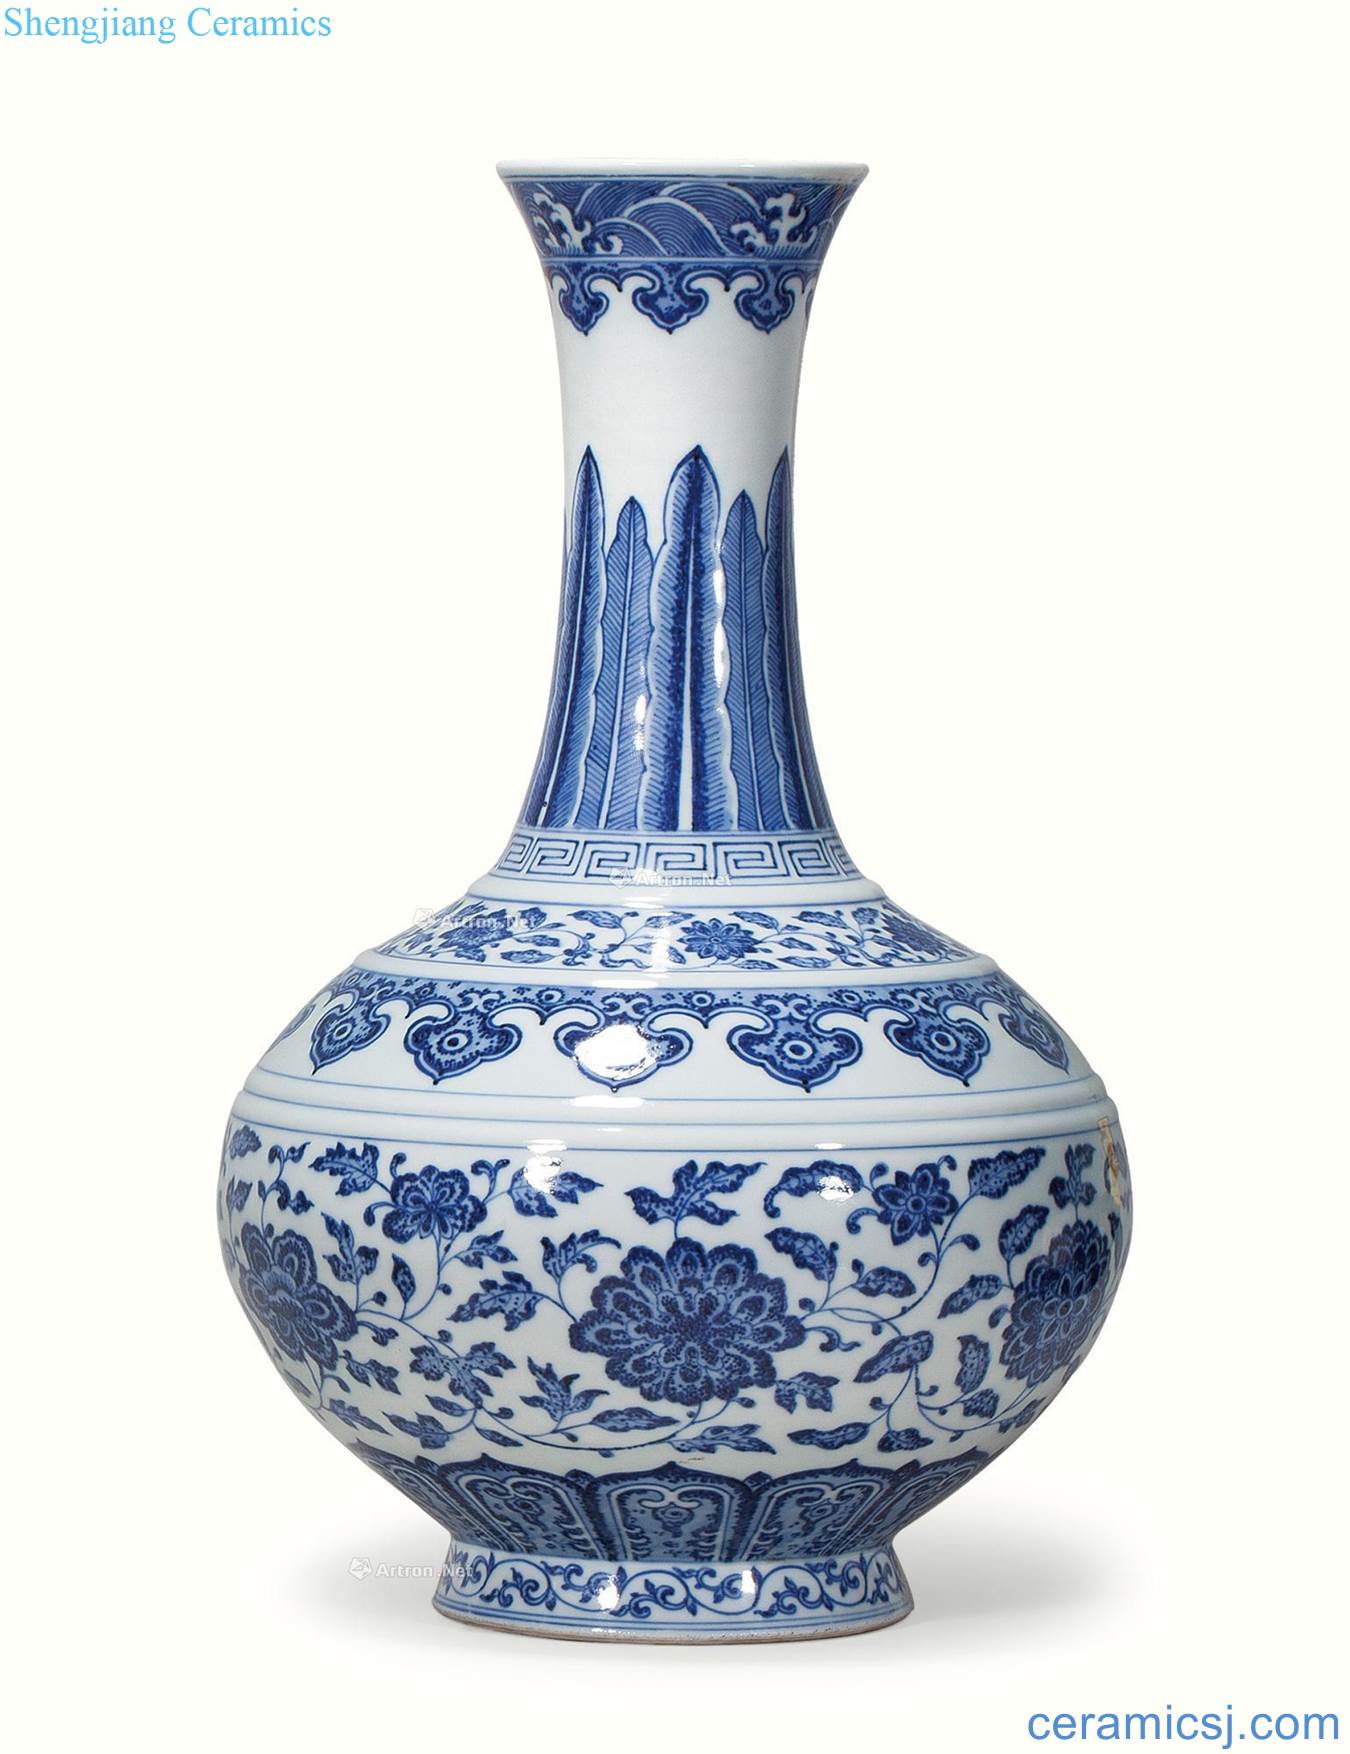 Qing jiaqing kiln Blue and white tie up flower pattern design